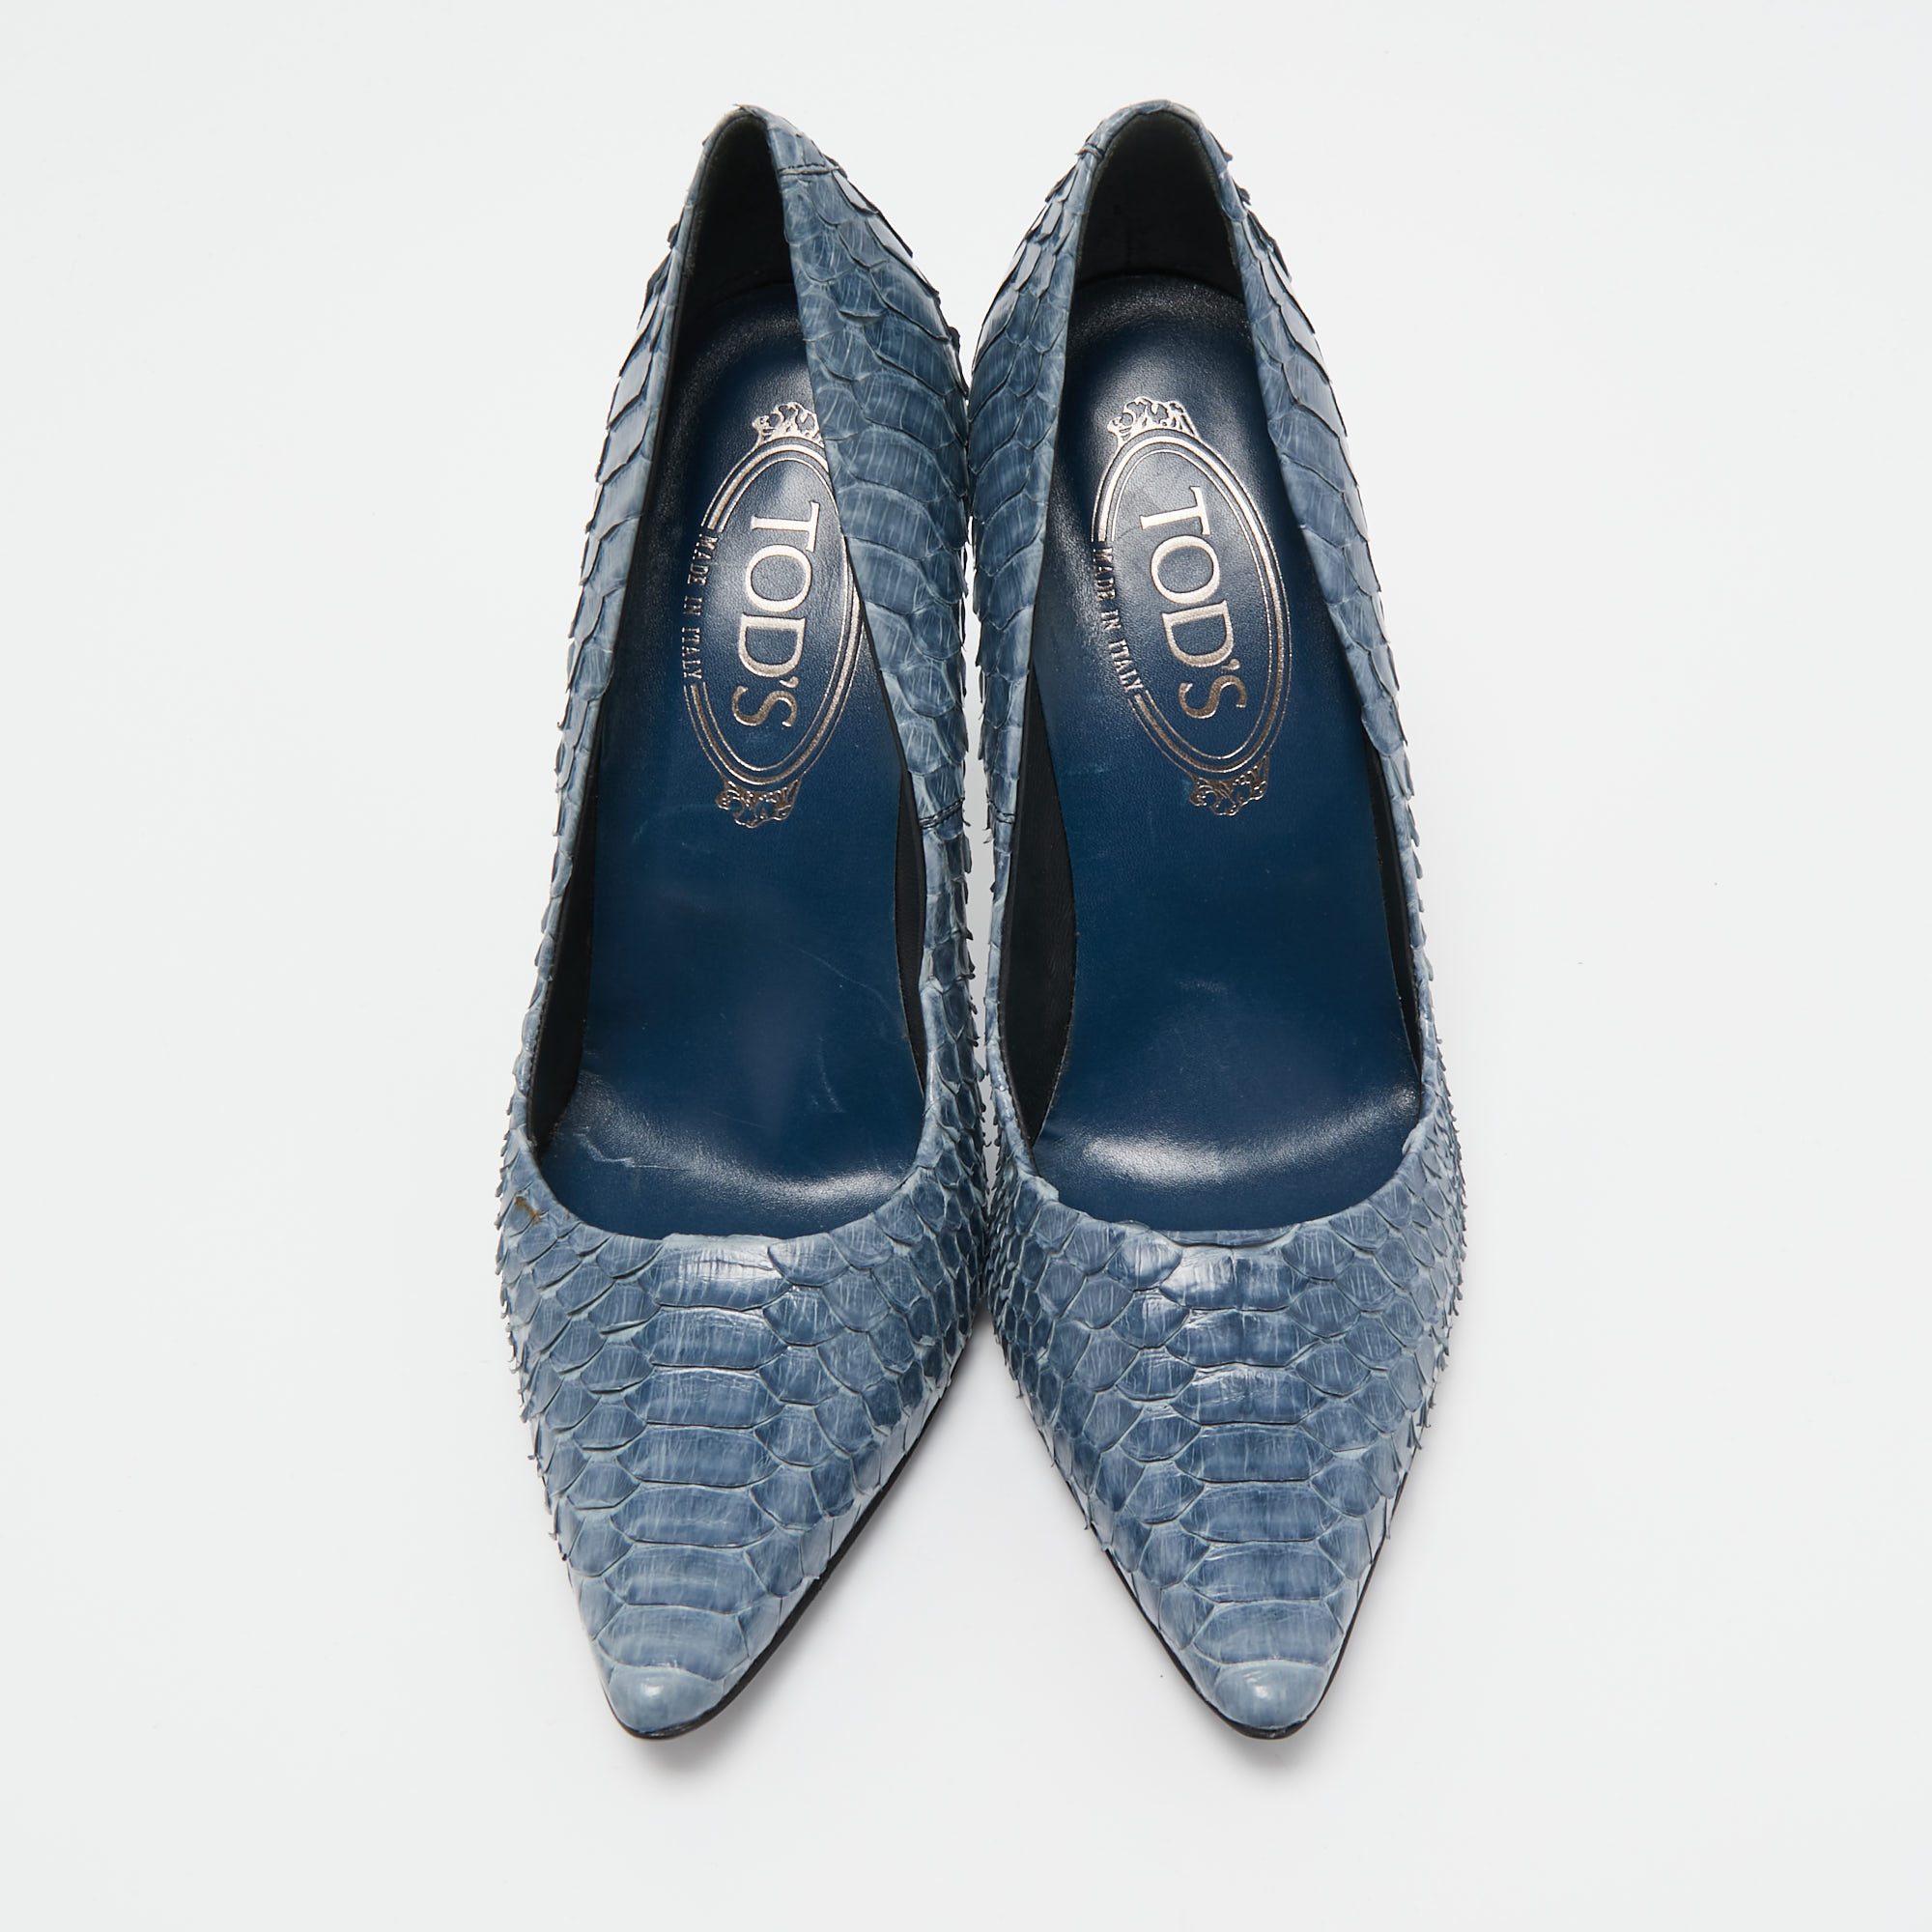 Tod's Blue Python Leather Pointed Toe Pumps Size 37.5